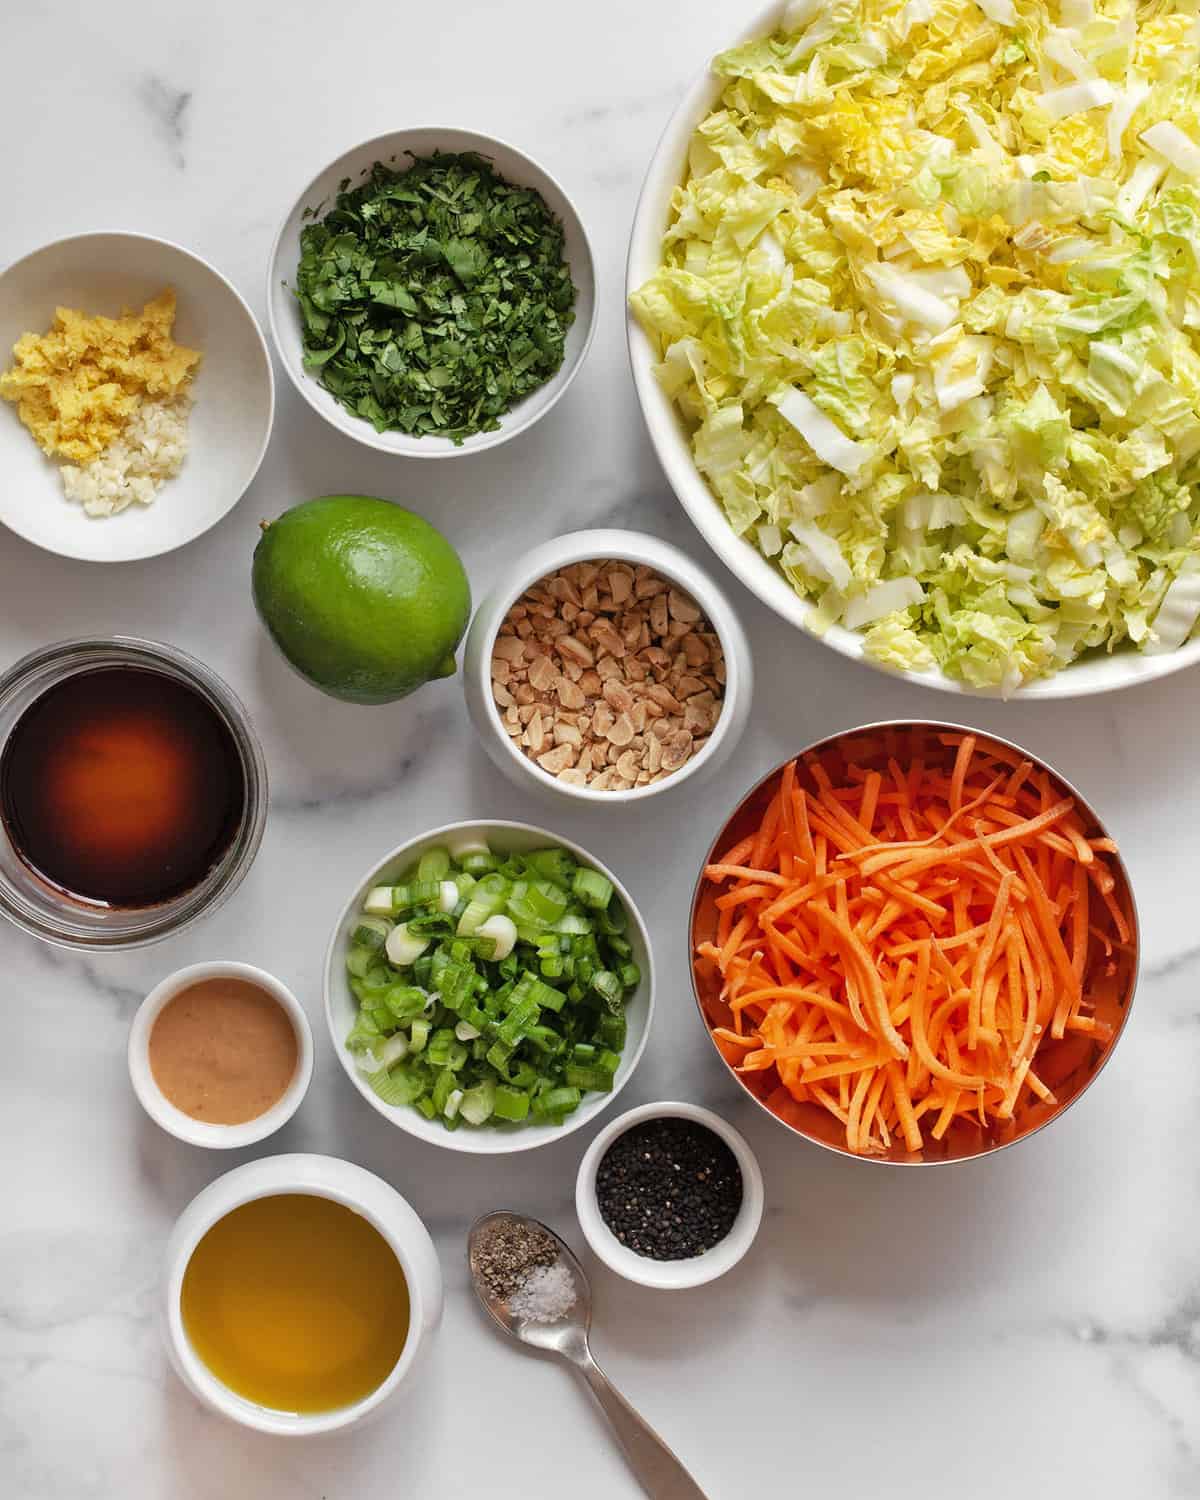 Ingredients including napa cabbage, carrots, scallions, cilantro, peanut butter, peanuts, soy sauce, olive oil, lime, garlic, ginger and oil.